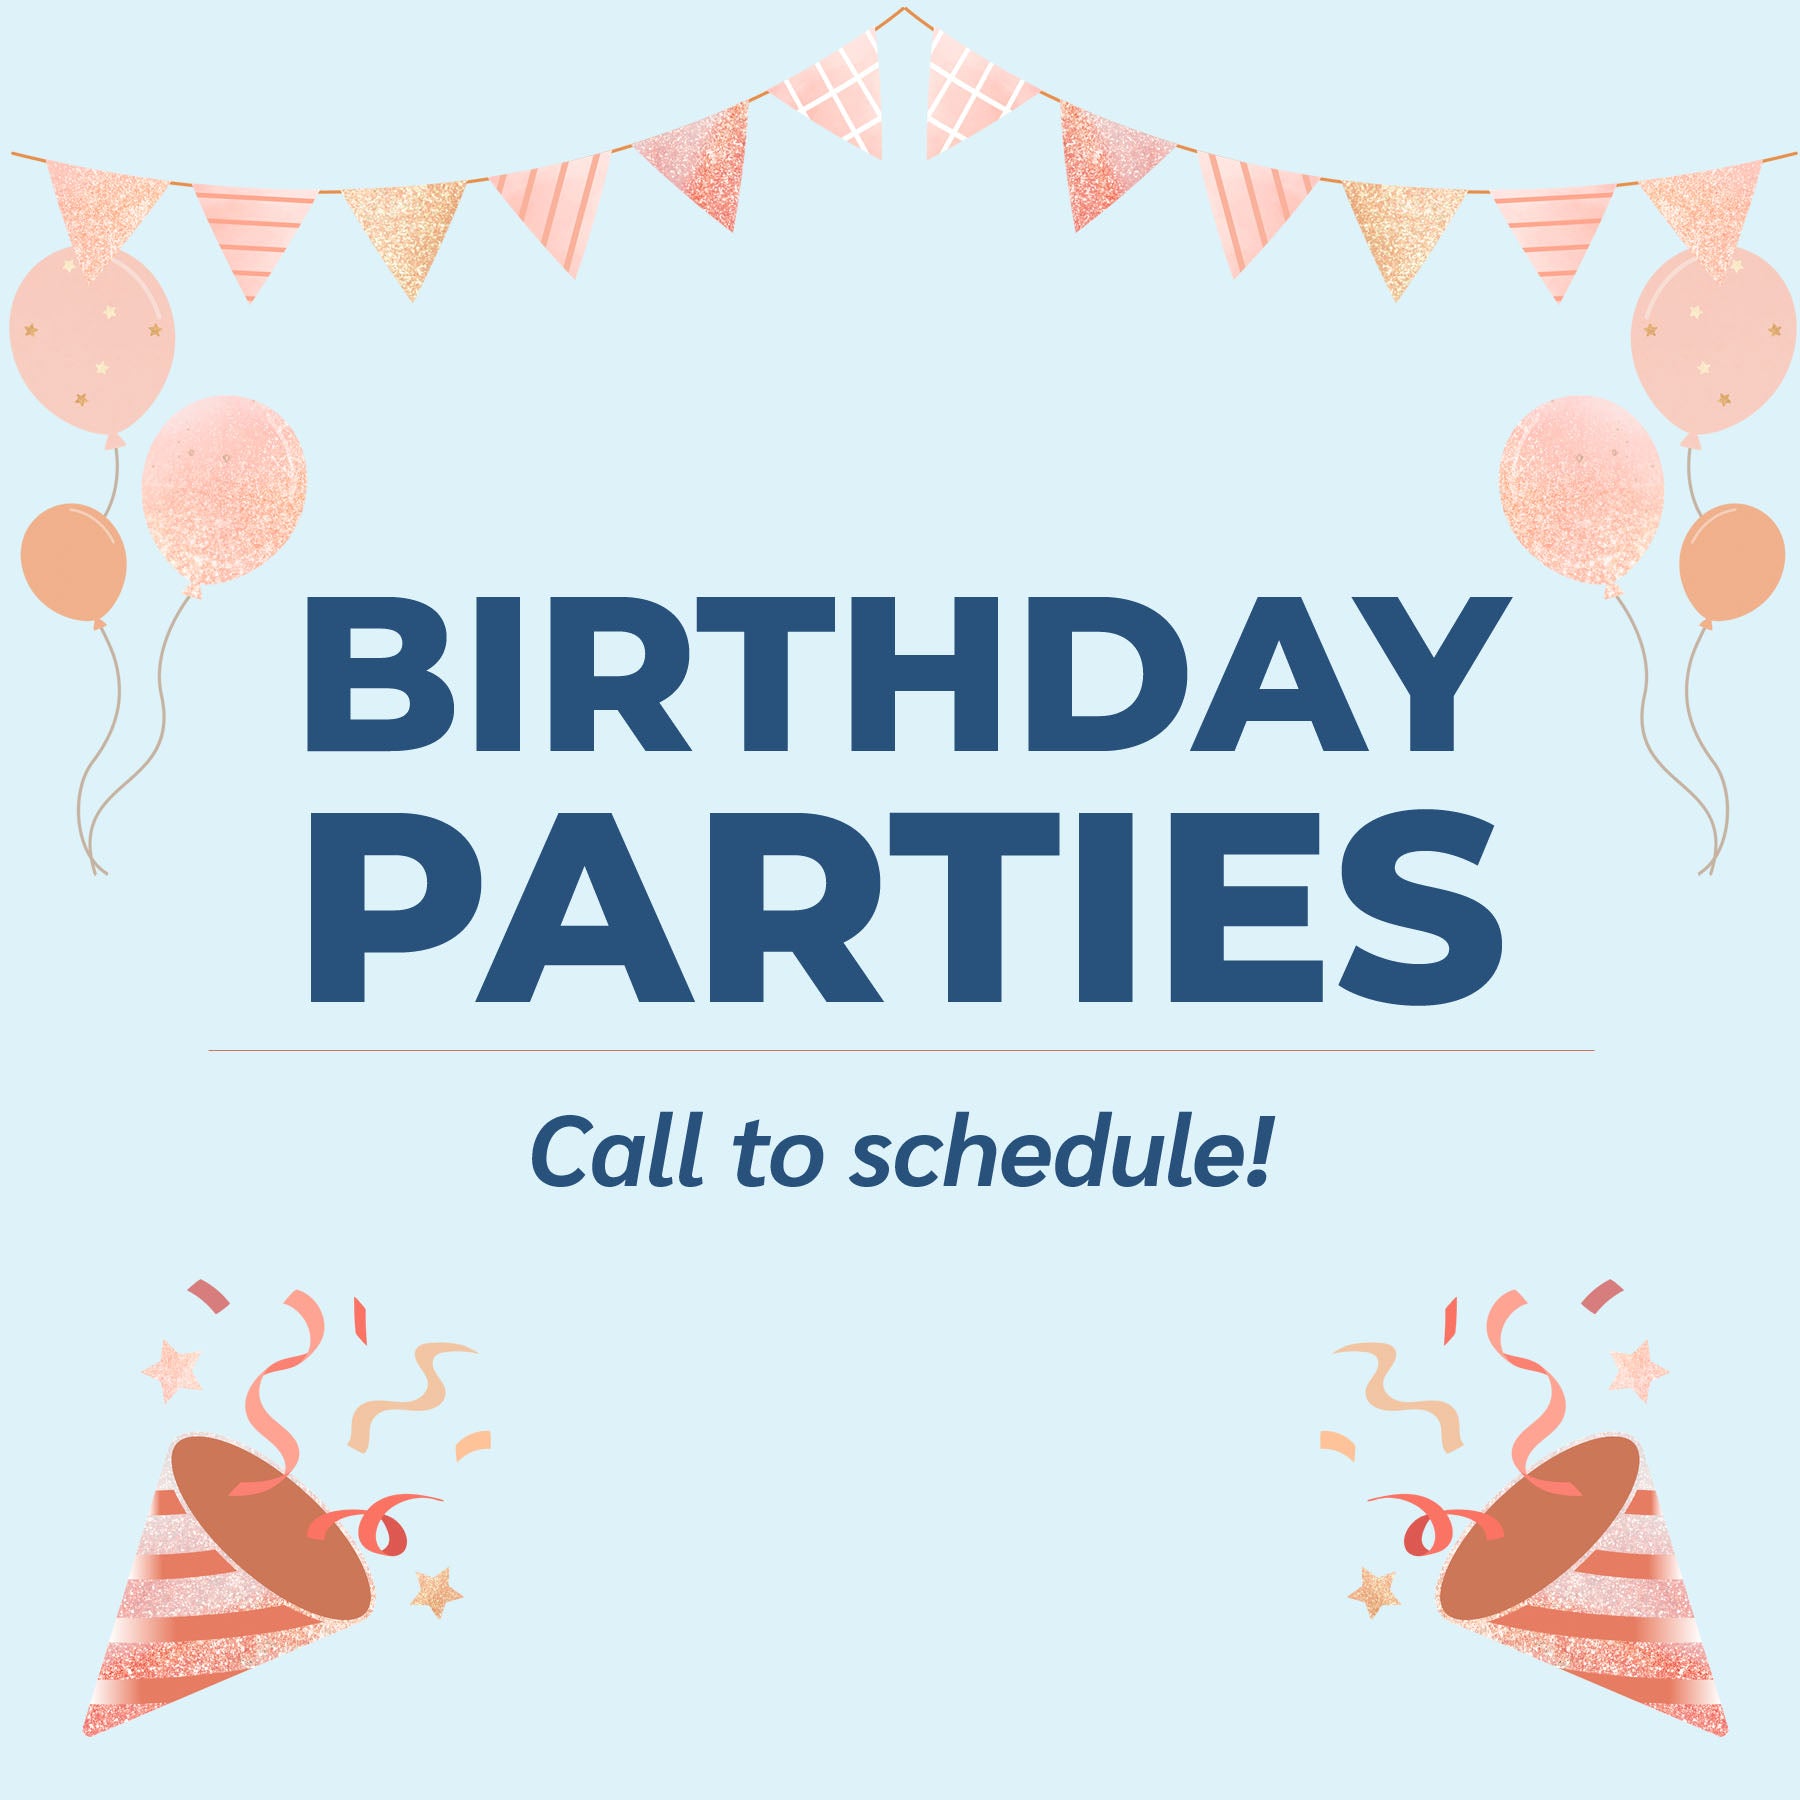 Kids' Birthday Party - Call to Schedule